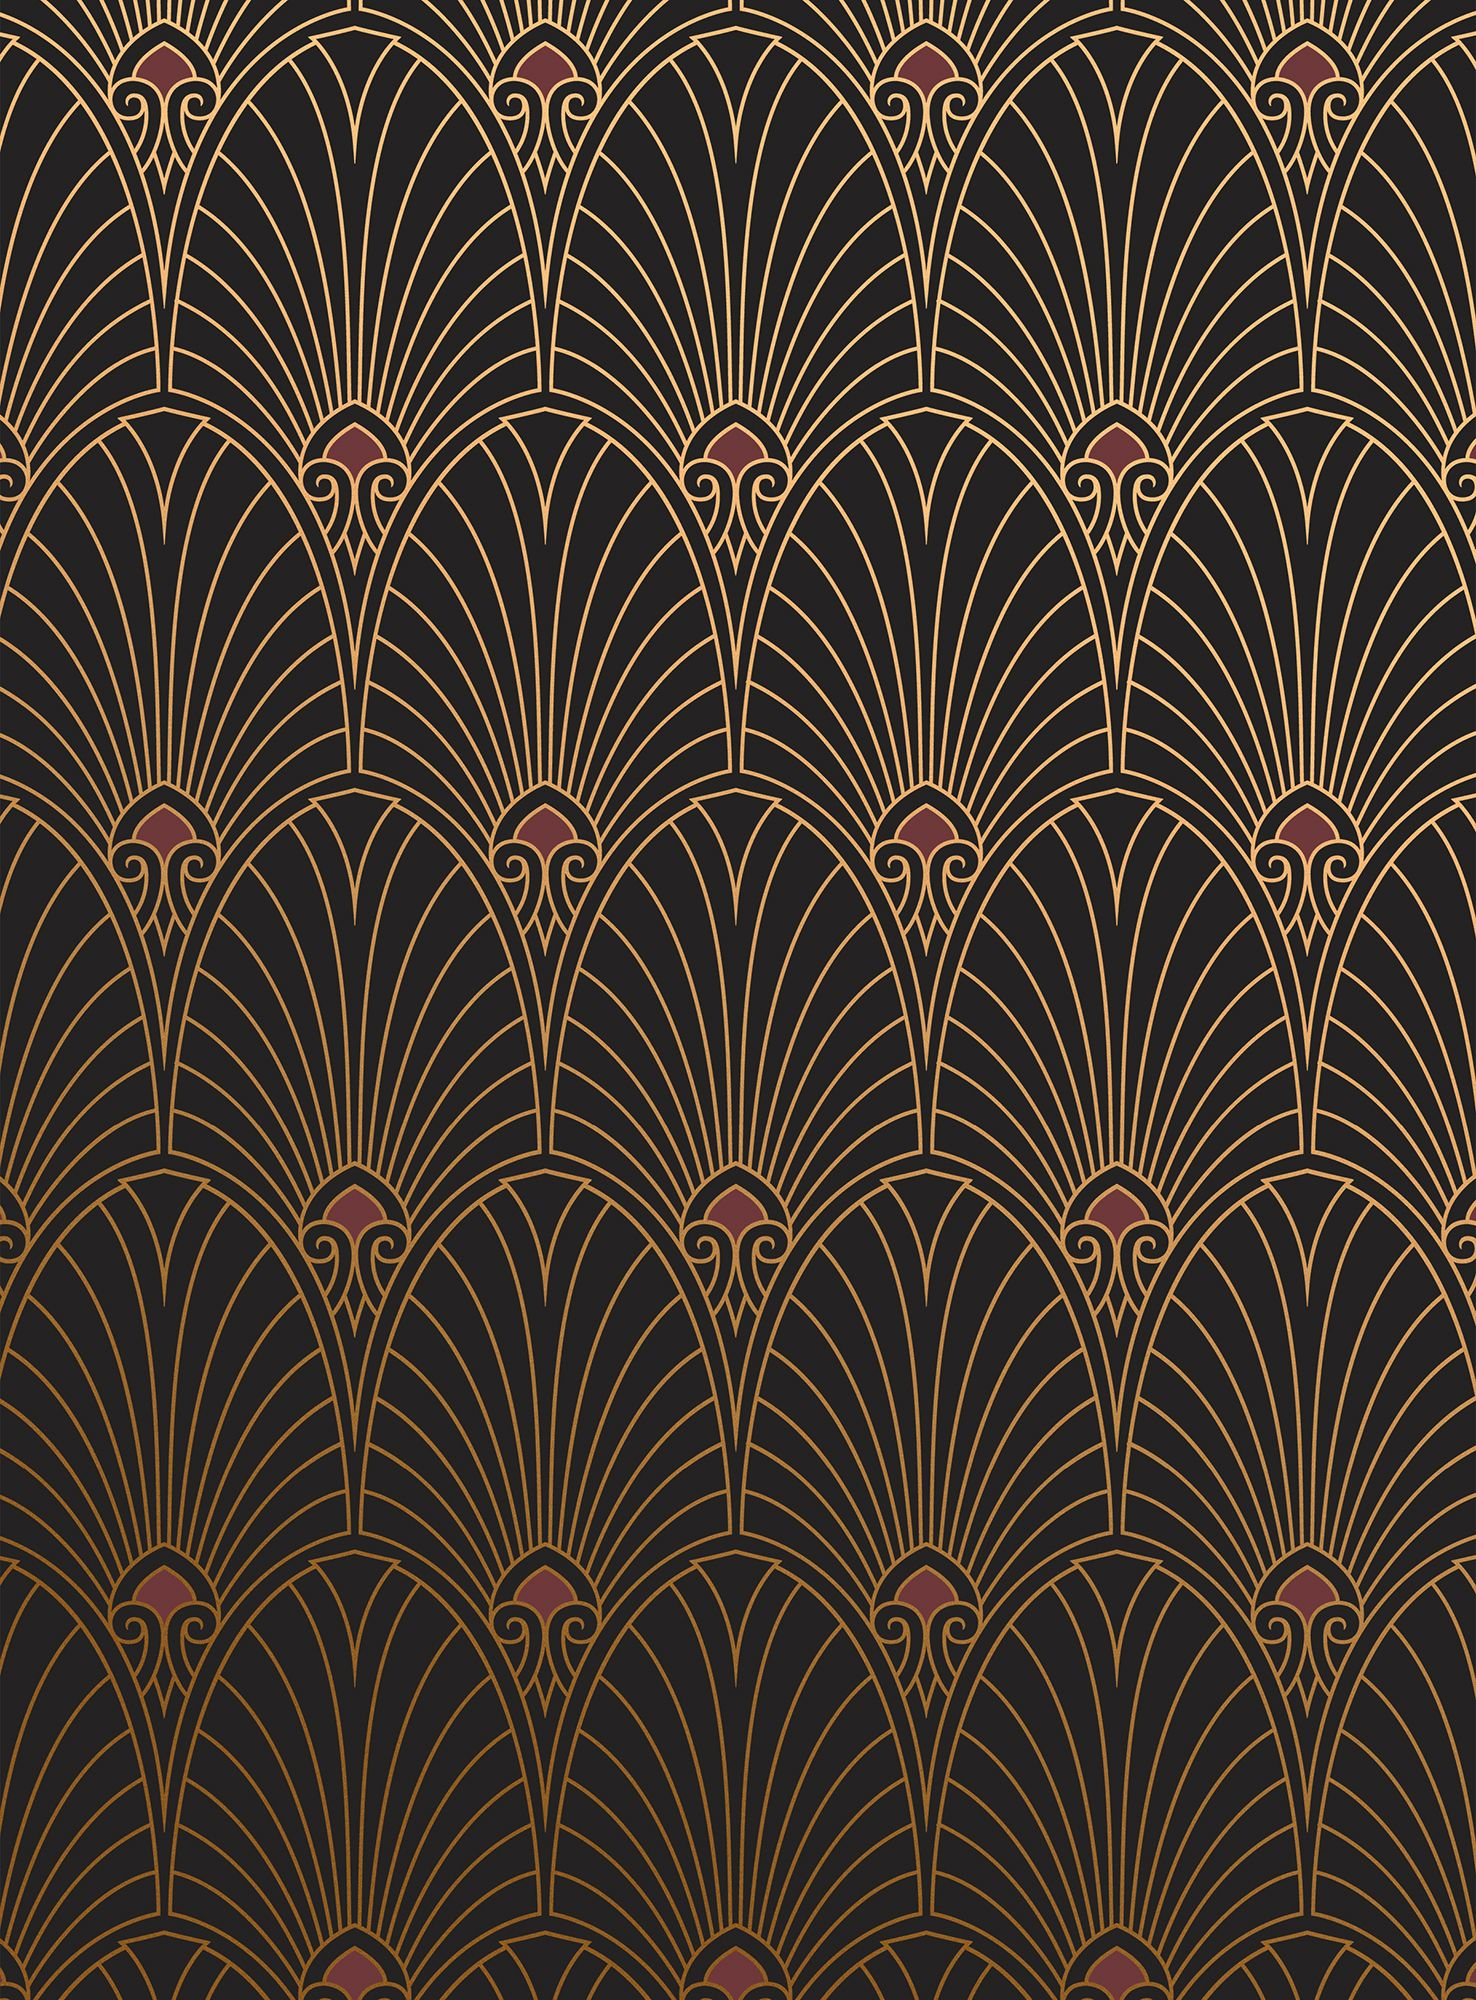 1476x2000 18 Art Deco Wallpaper Ideas Decorating with 1920s Art Deco Wall Coverings